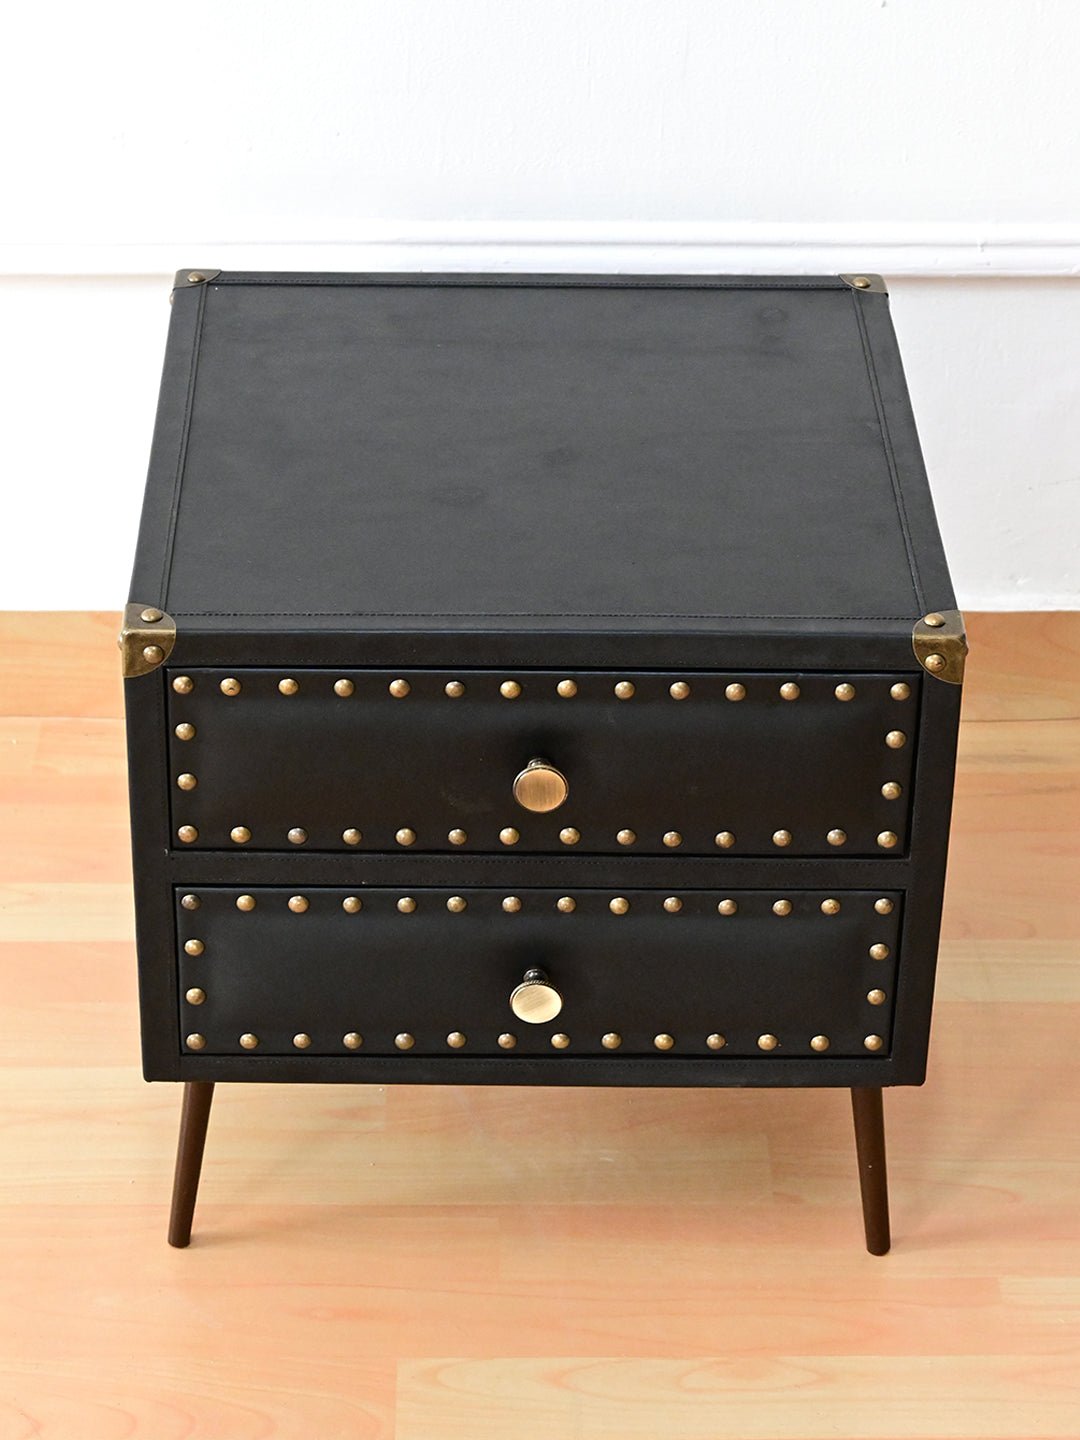 BALTIMORE - TWO DRAWER LEATHER SIDE TABLE - ART AVENUE